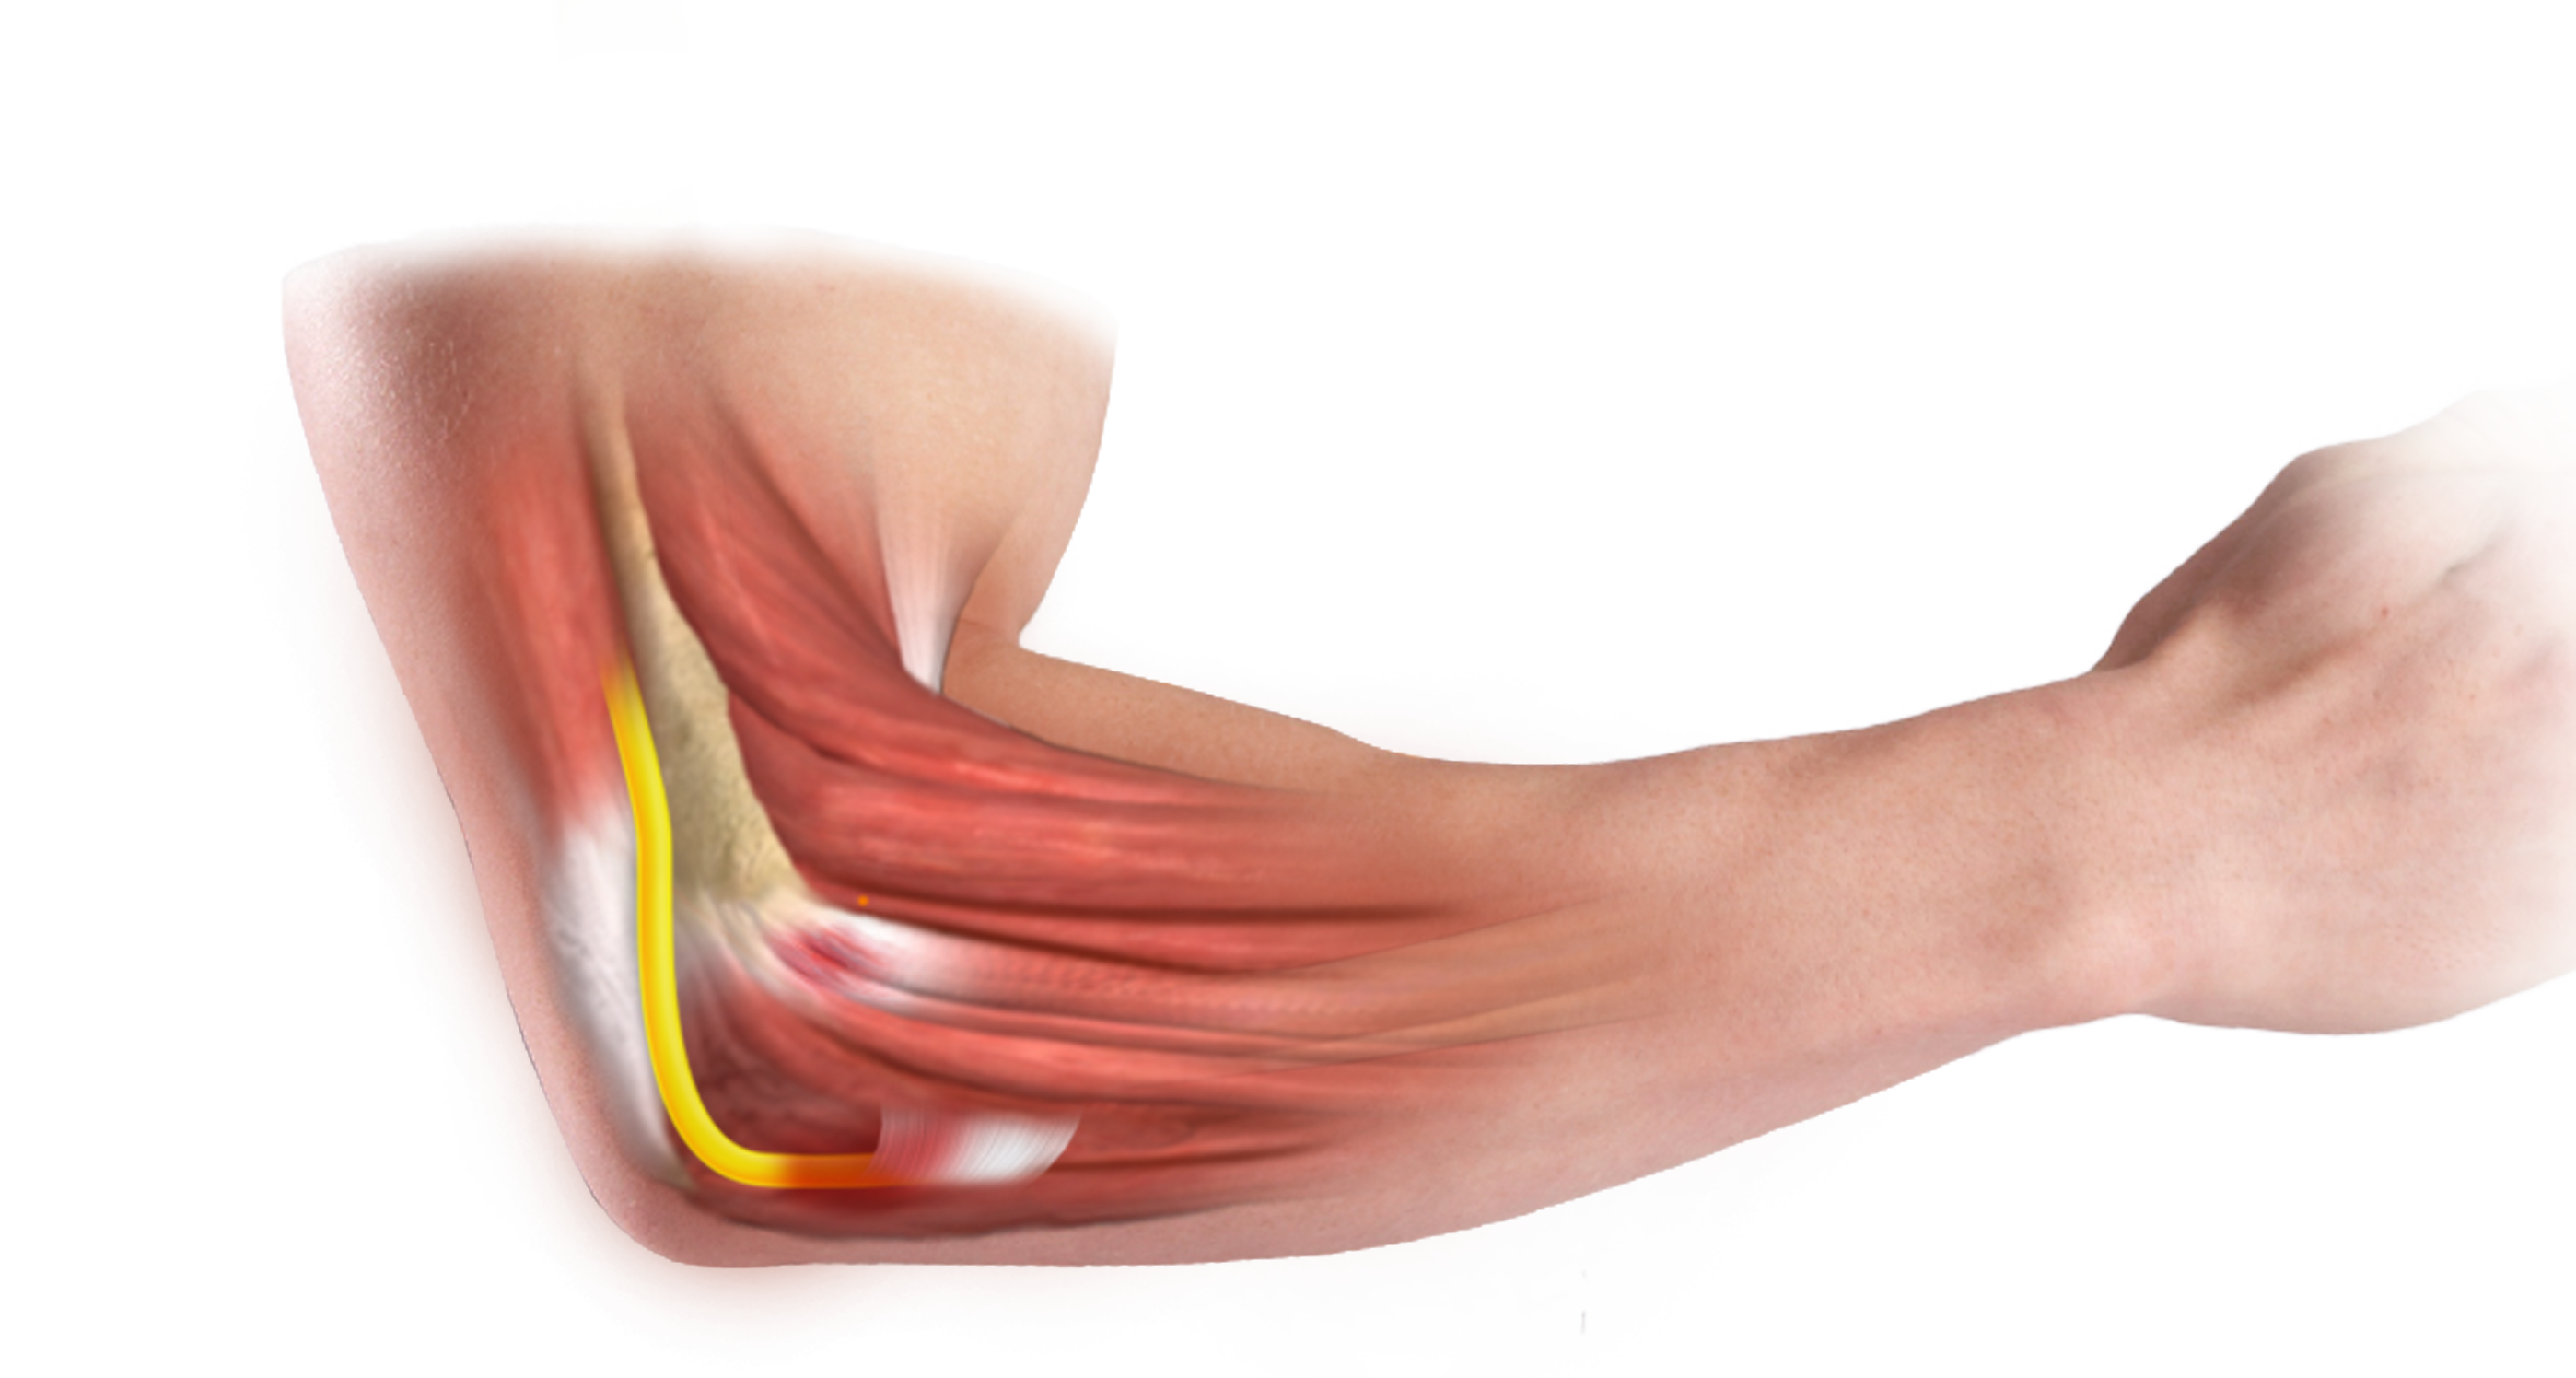 ulnar tunnel syndrome